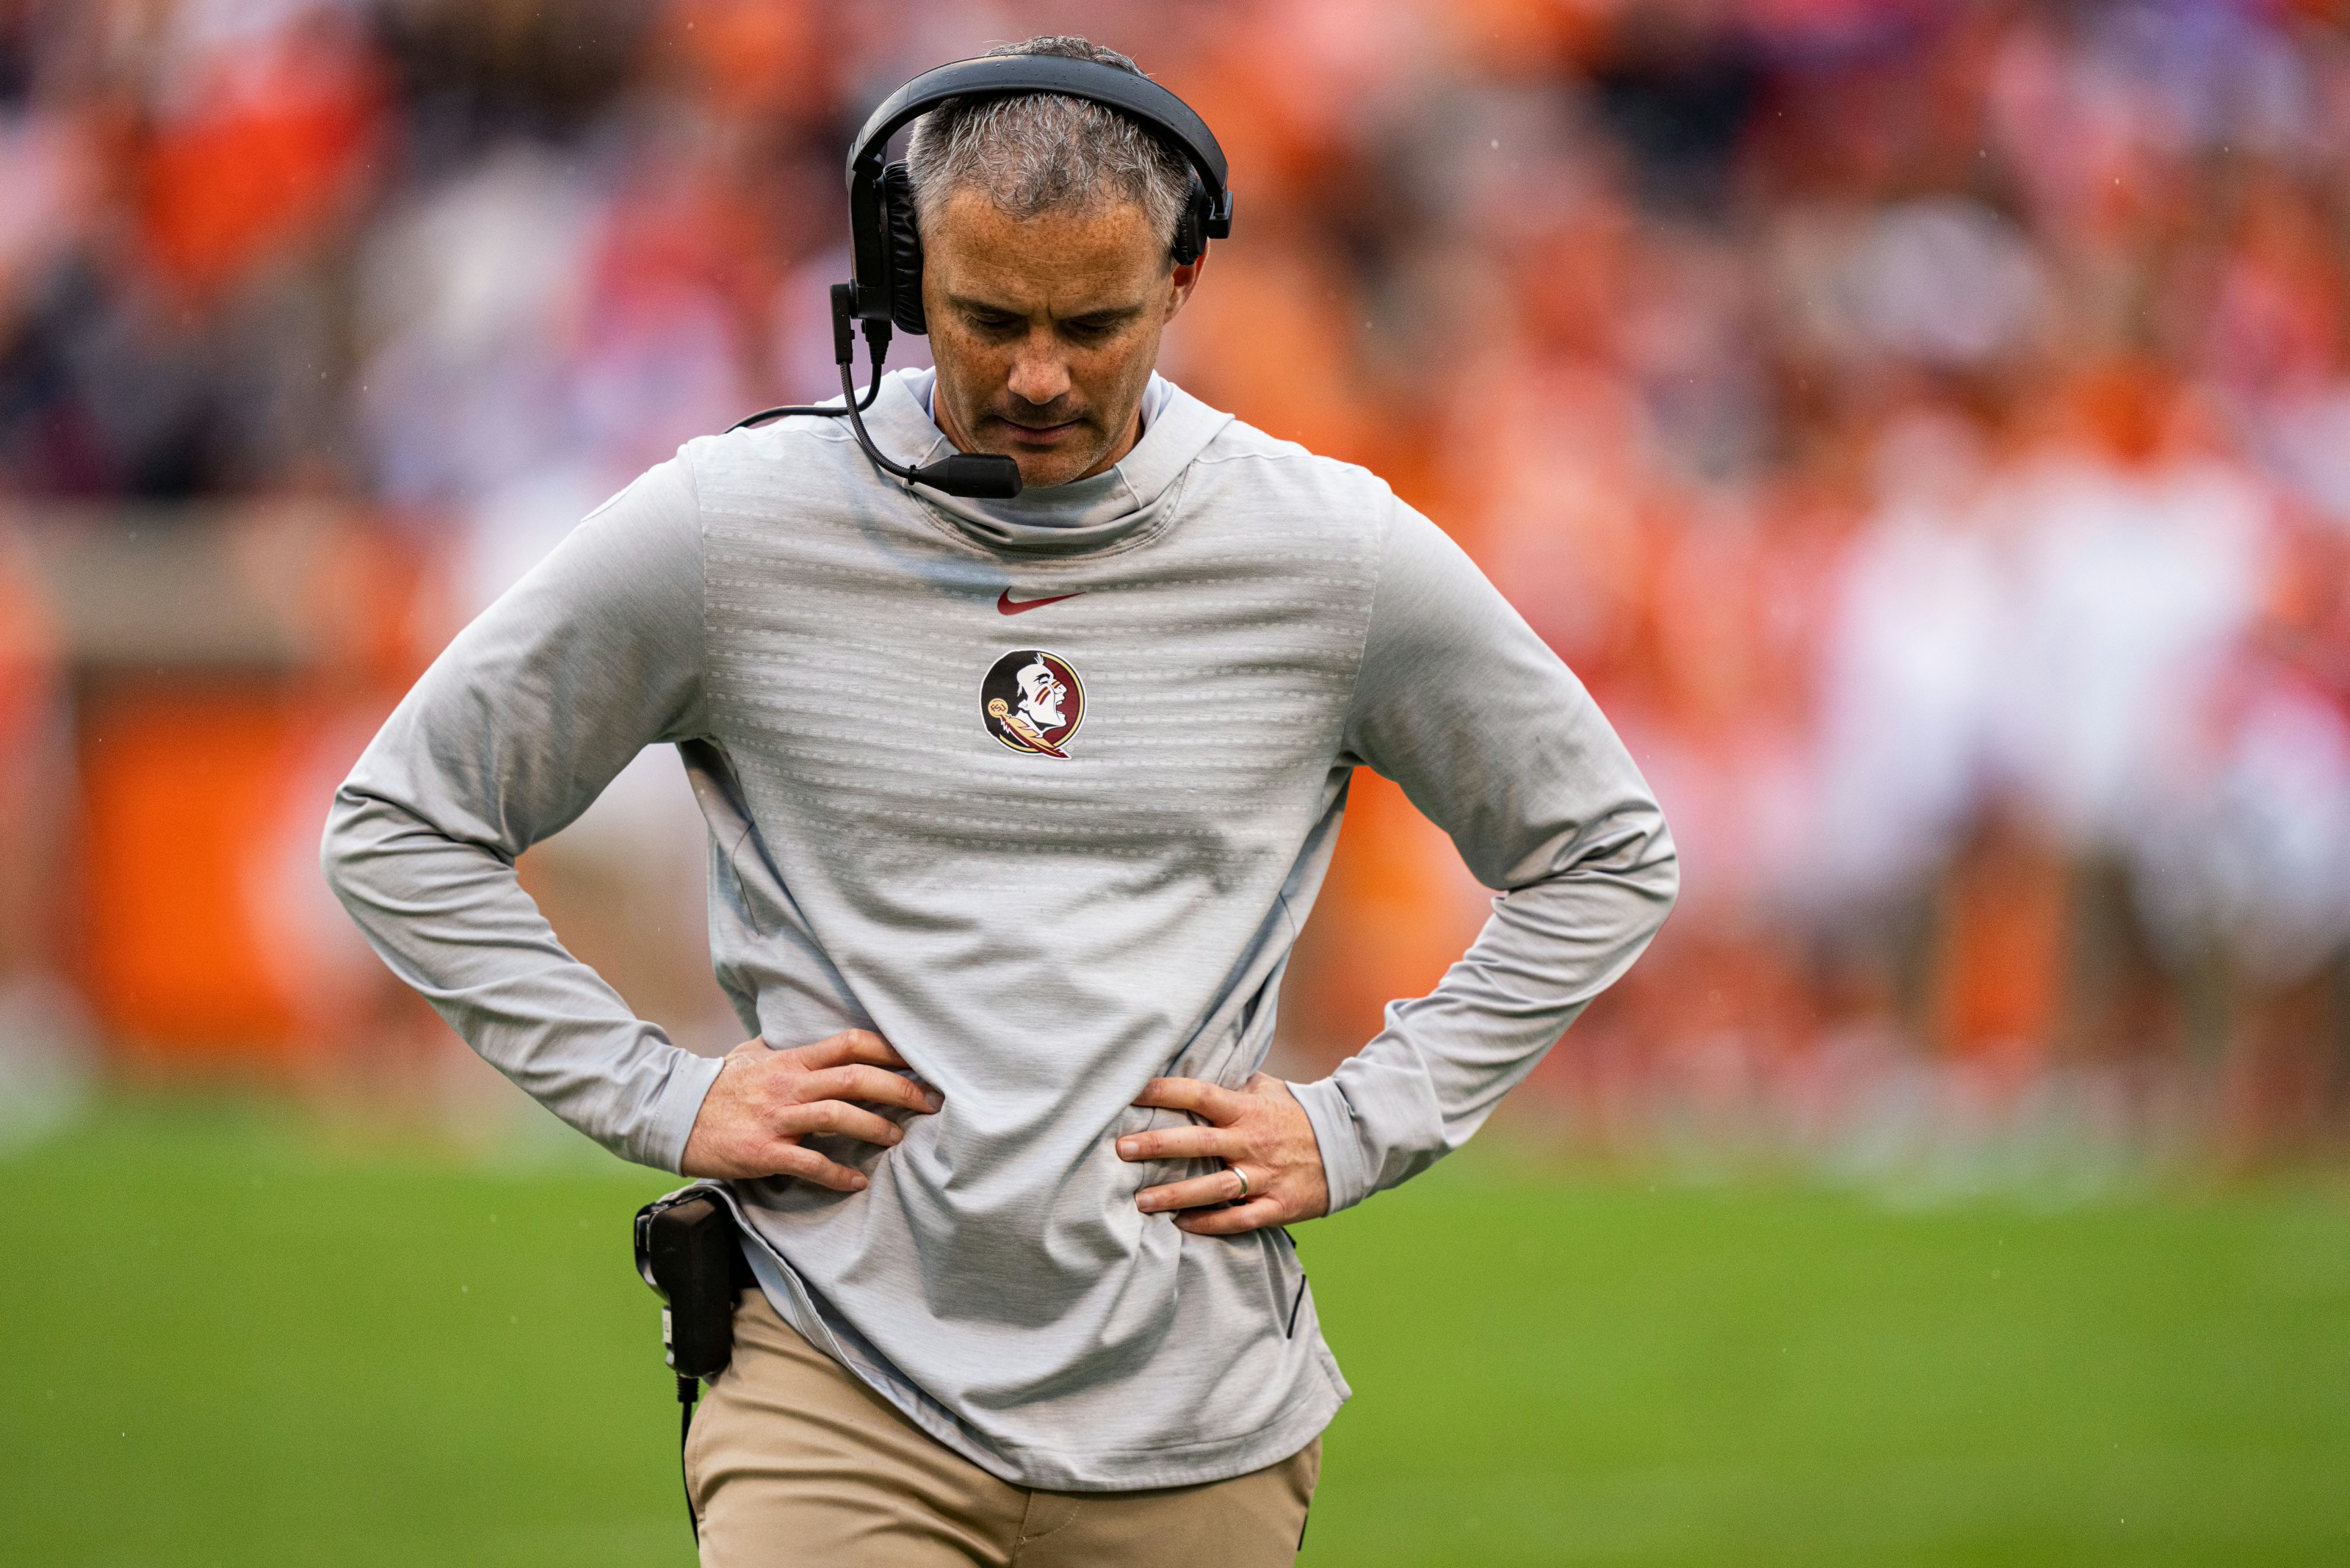 Toasty Buns: 5 college football coaches on hot seat entering 2022 - Page 2